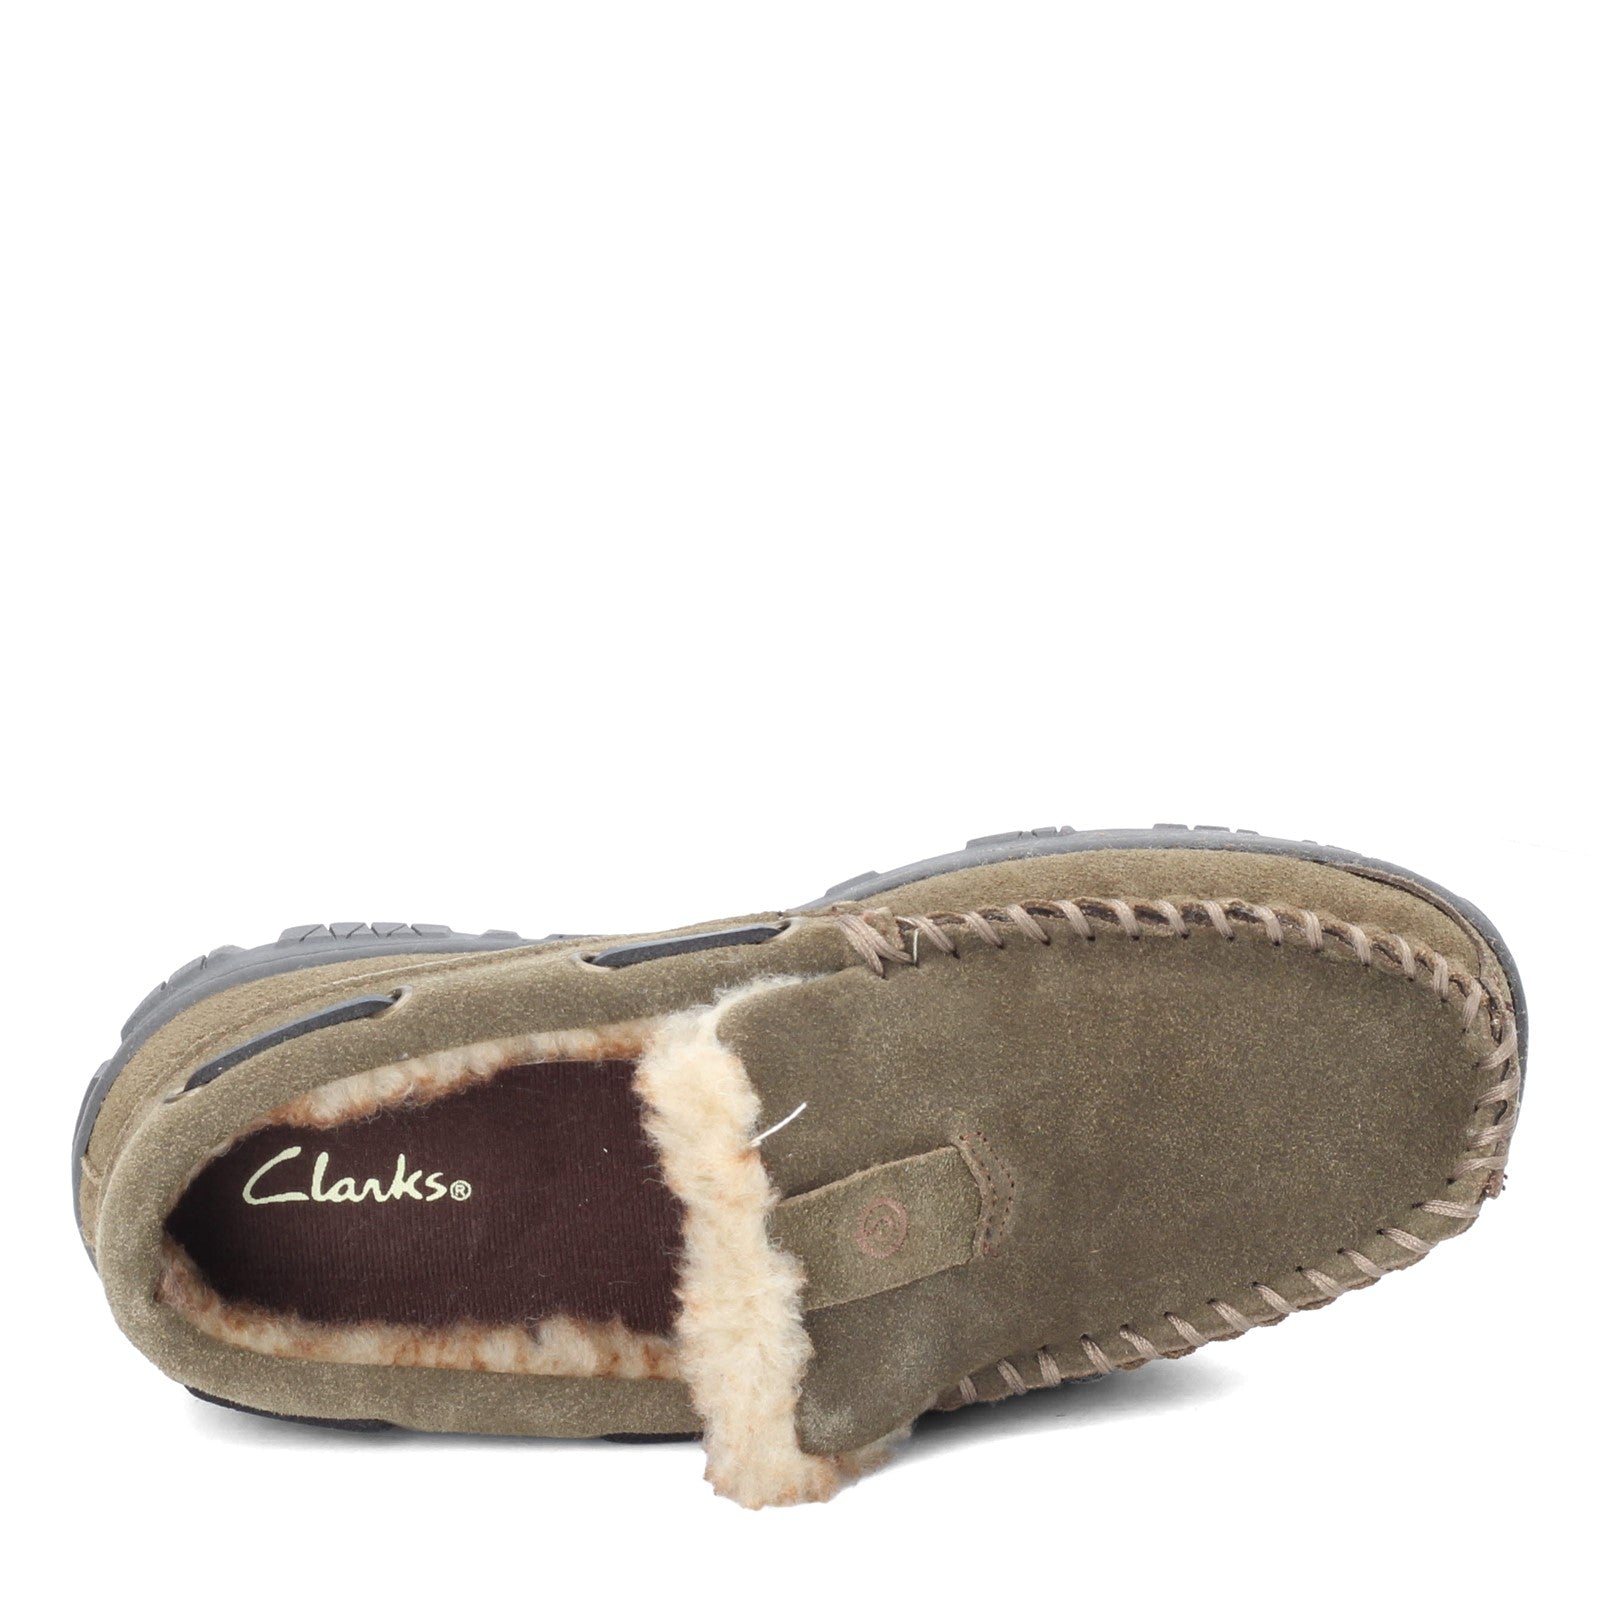 Buy Clarks Fur Lined Moccasin Slippershouse Shoes